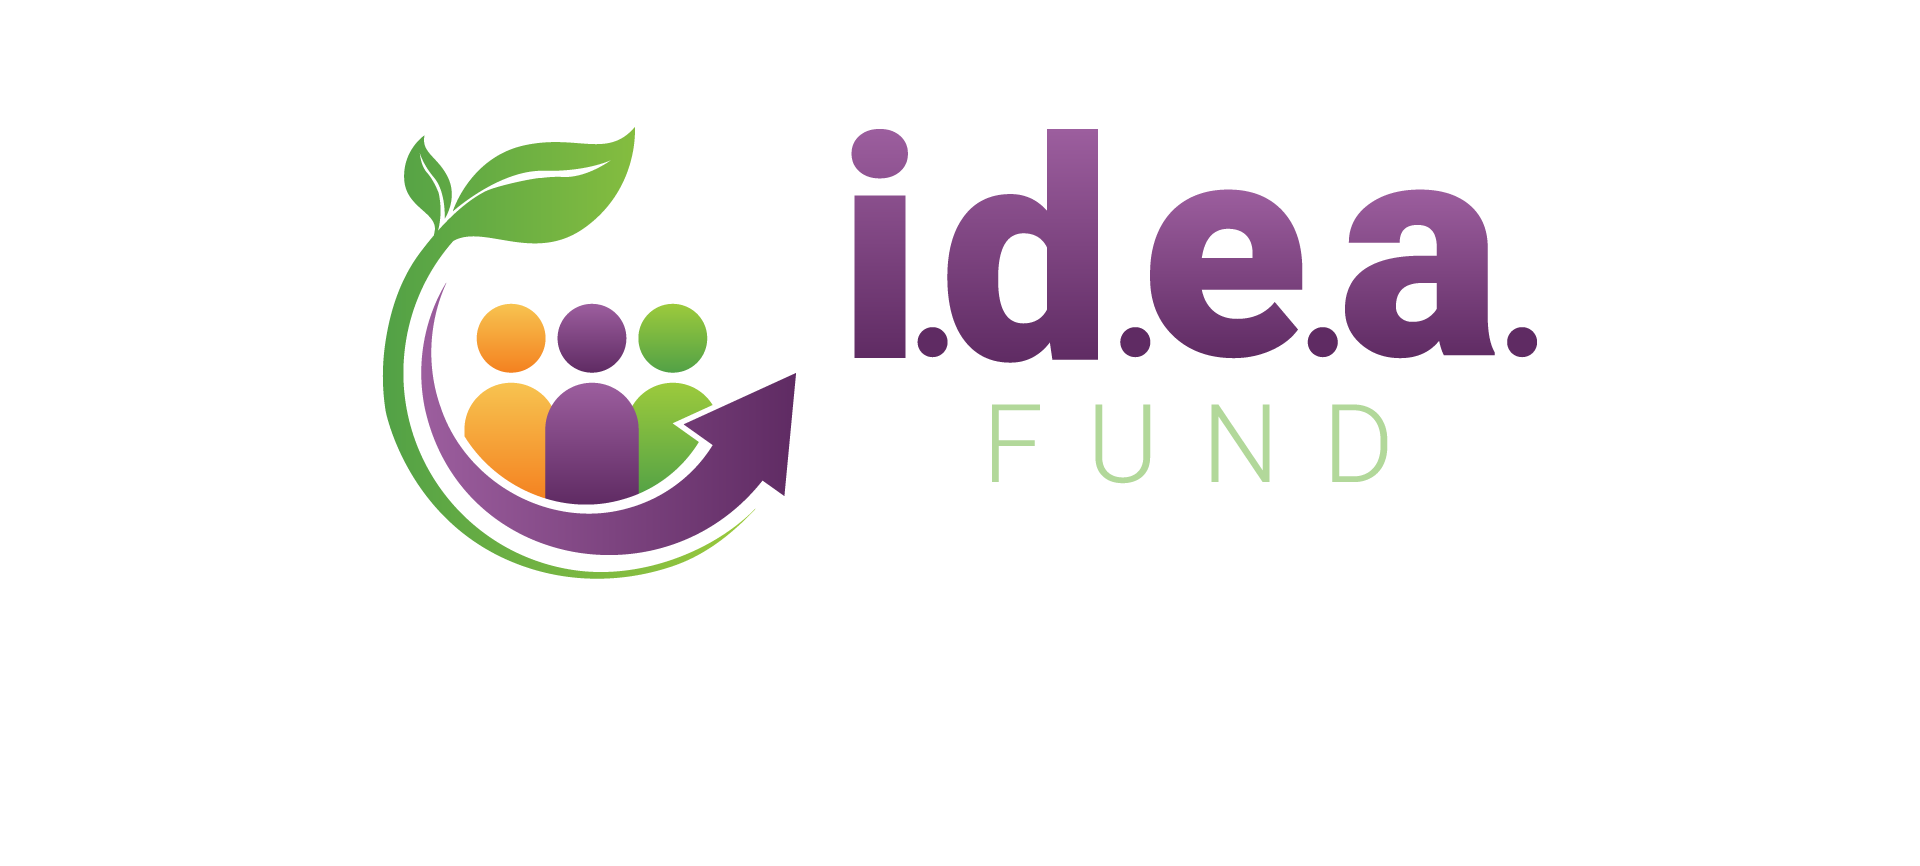 idea Fund logo and delivery partner logos